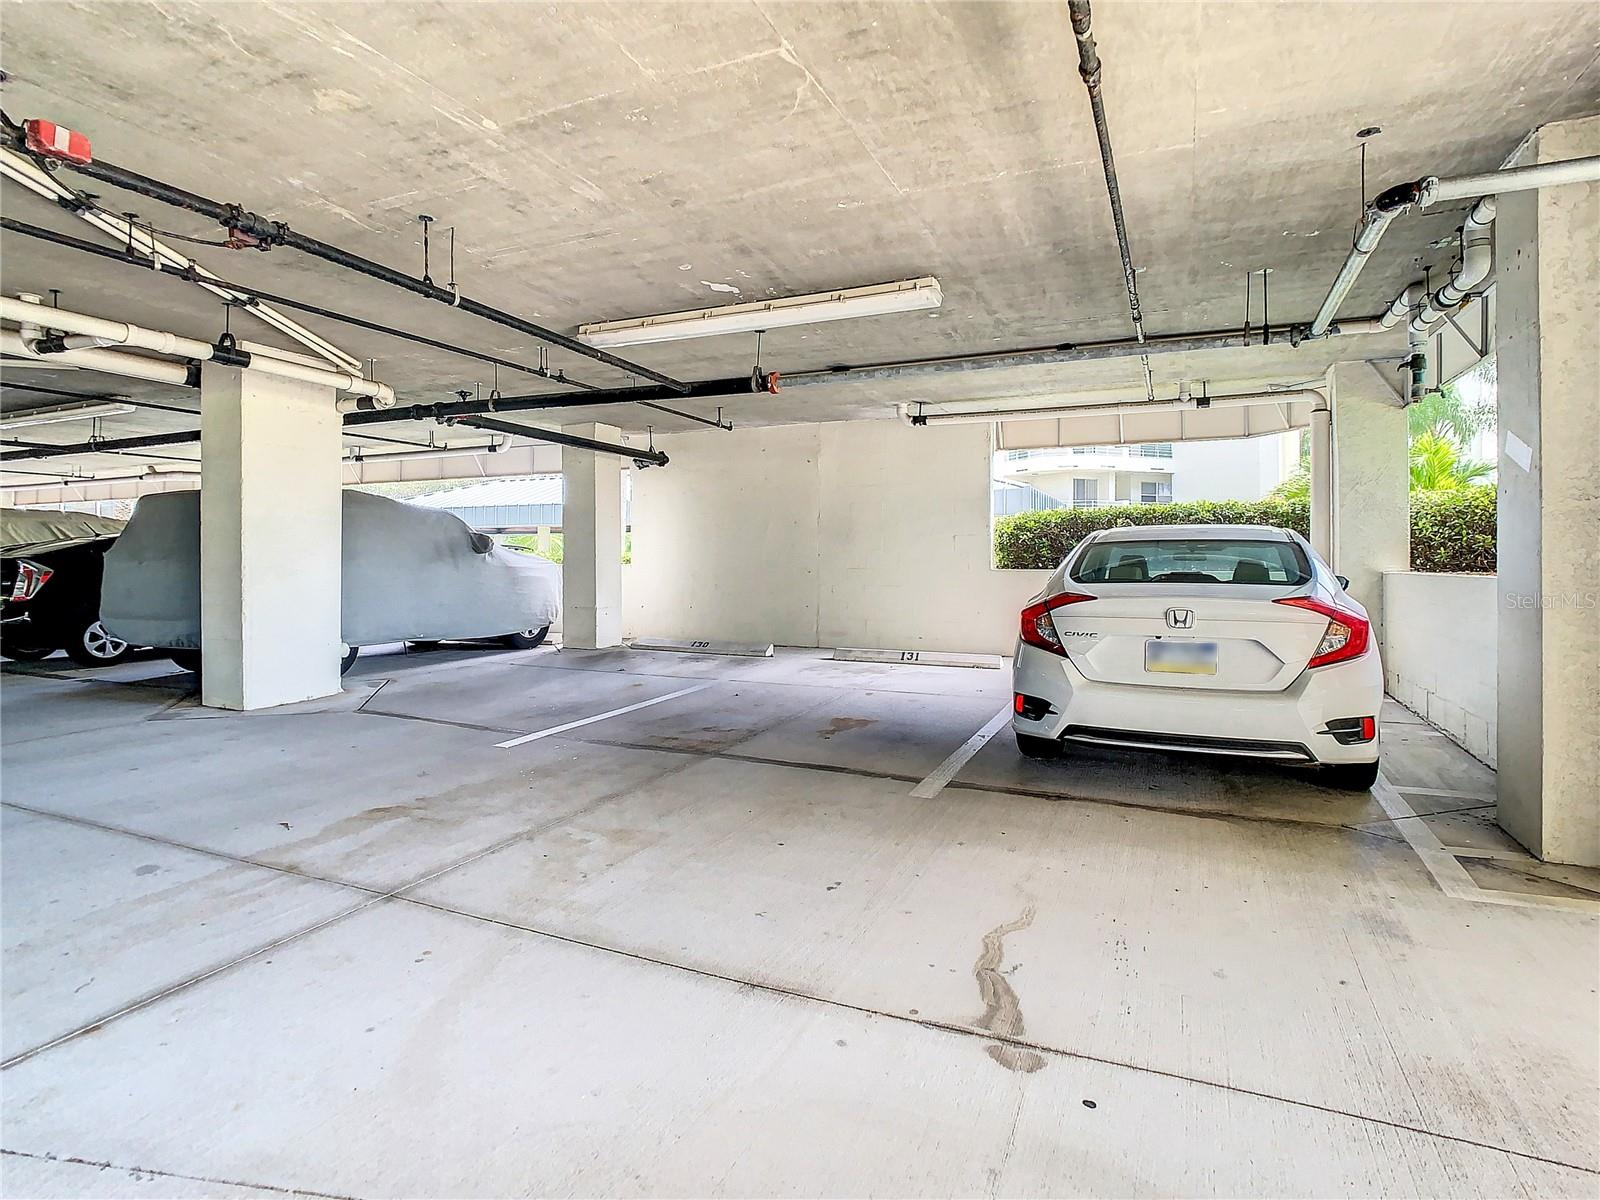 Another look at the parking space in the parking garage under the building